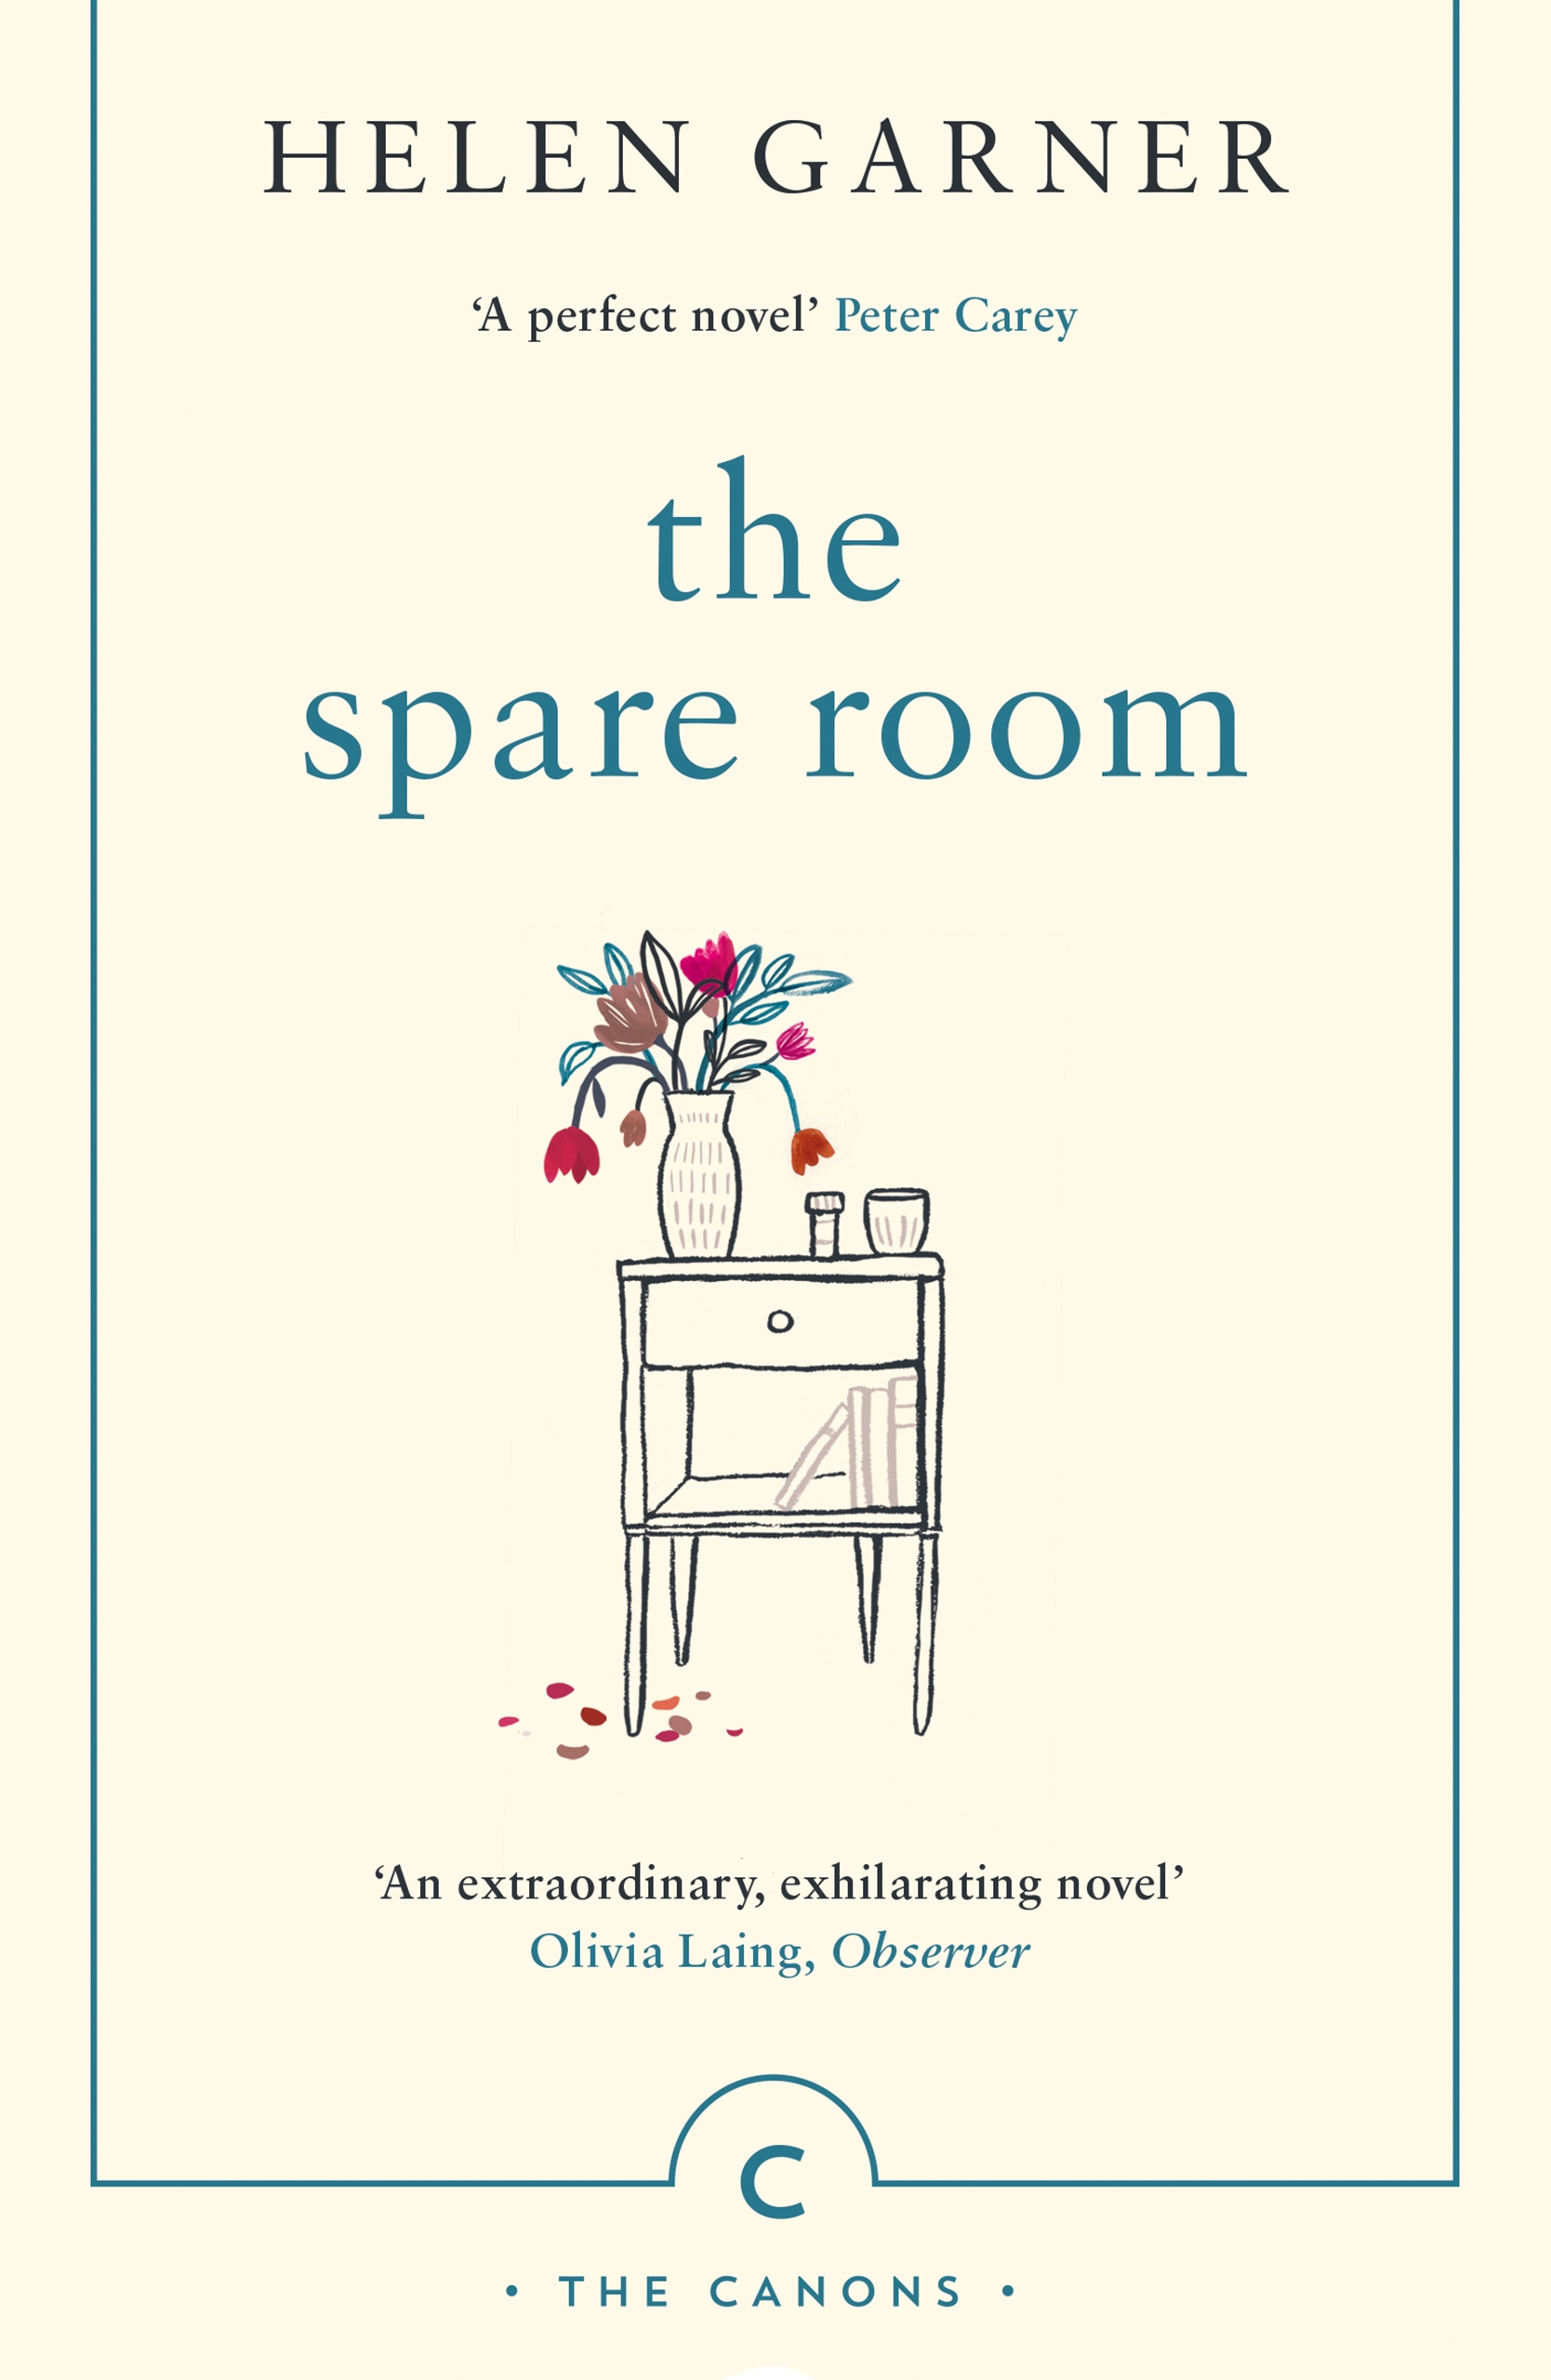 THE SPARE ROOM